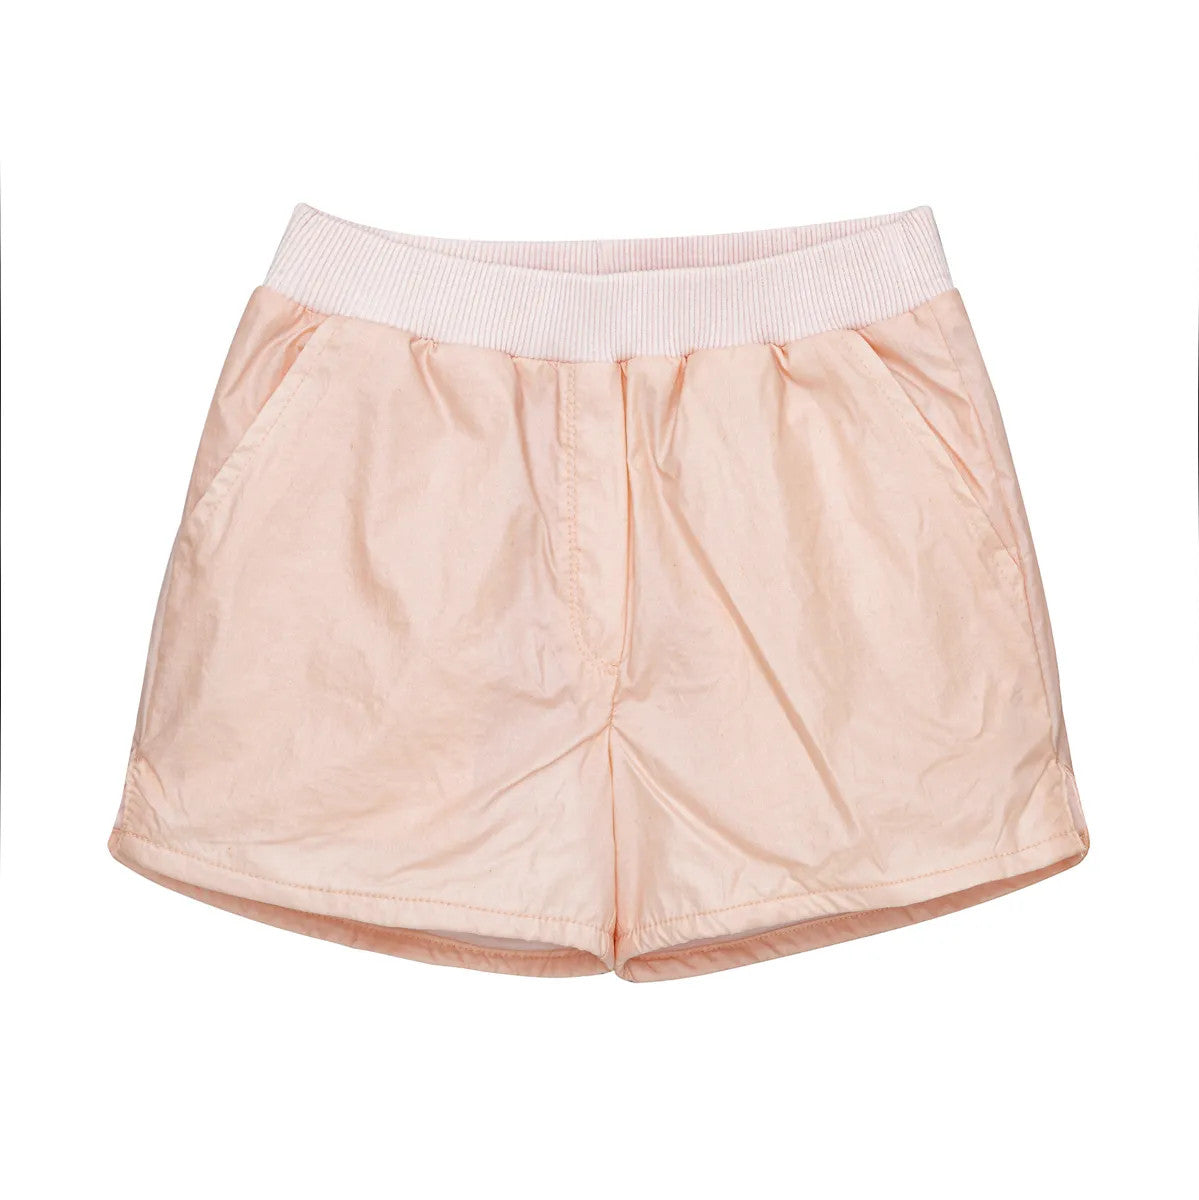 Little Hedonist organic cotton shorts with side pockets and splits for boys and girls in EVening Sand